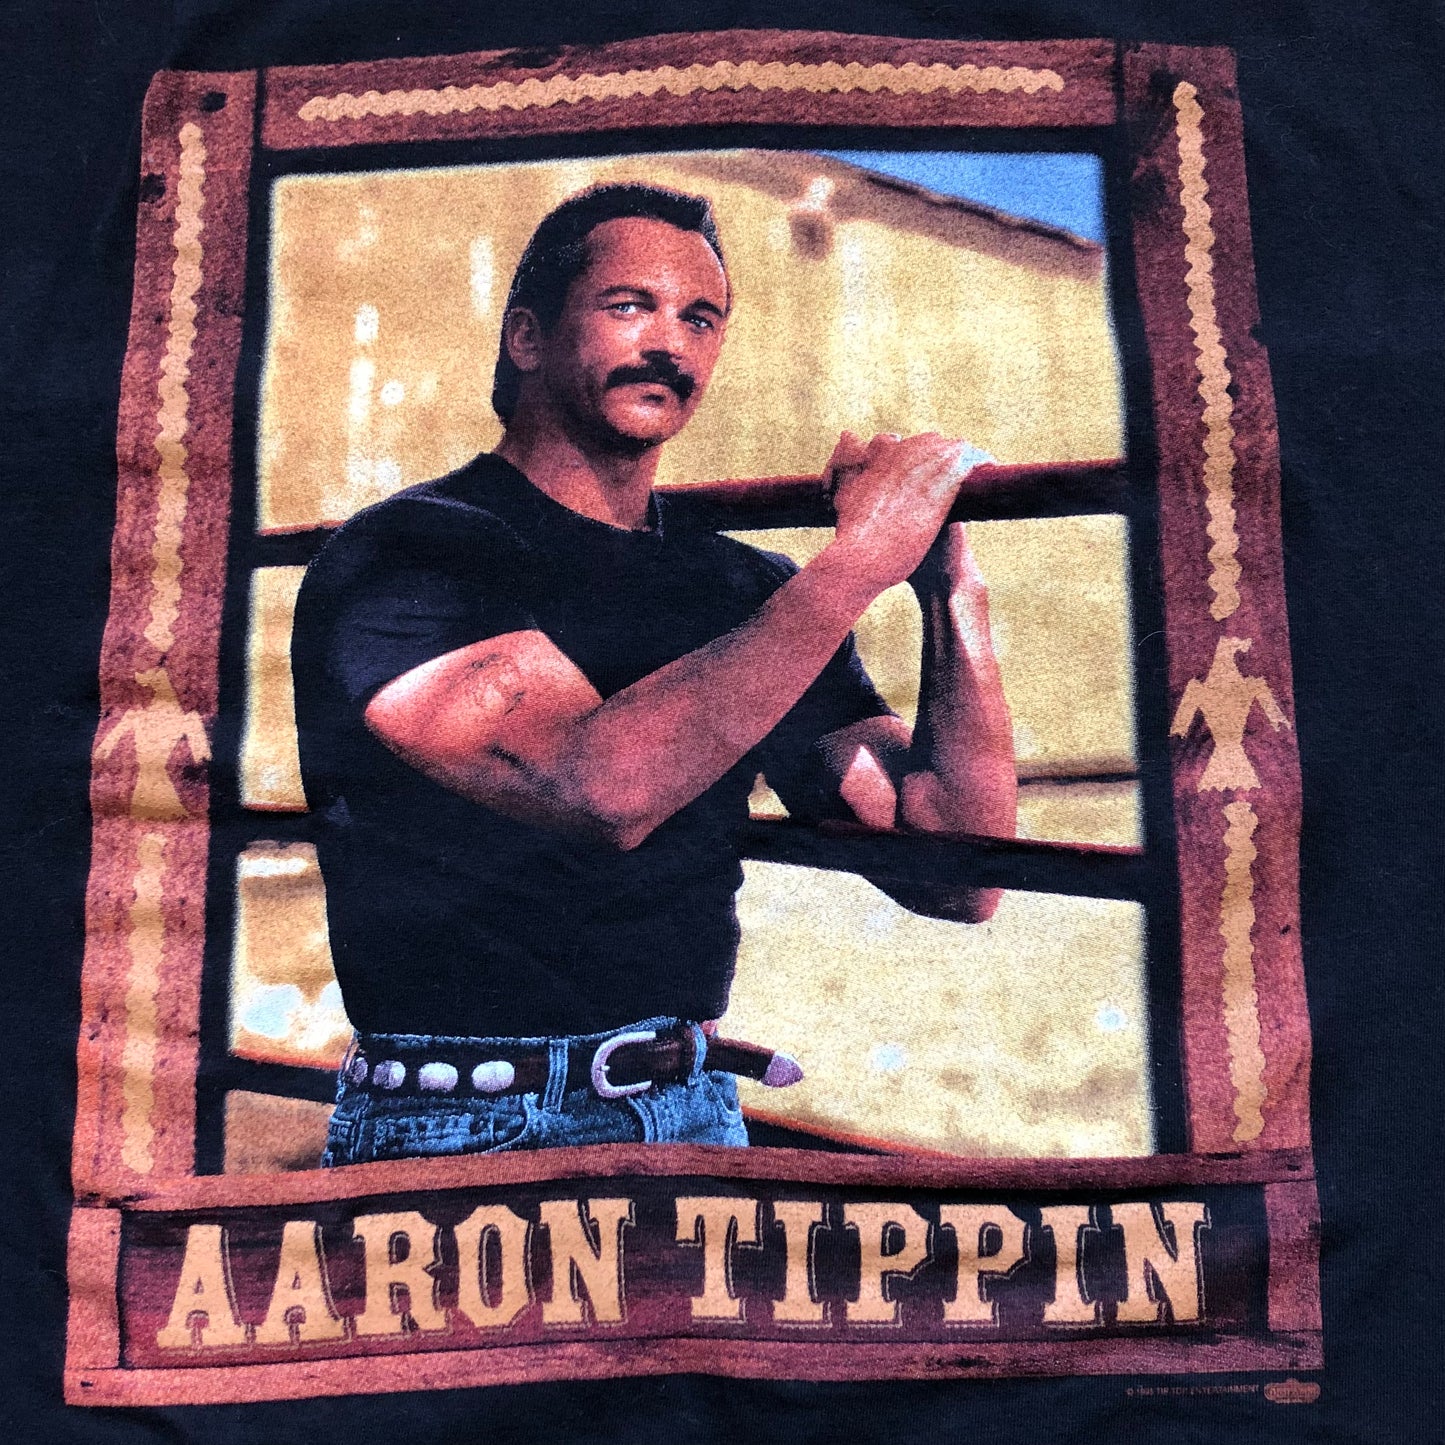 1995 Vintage Western Aaron Tippin Country Concert T-Shirt